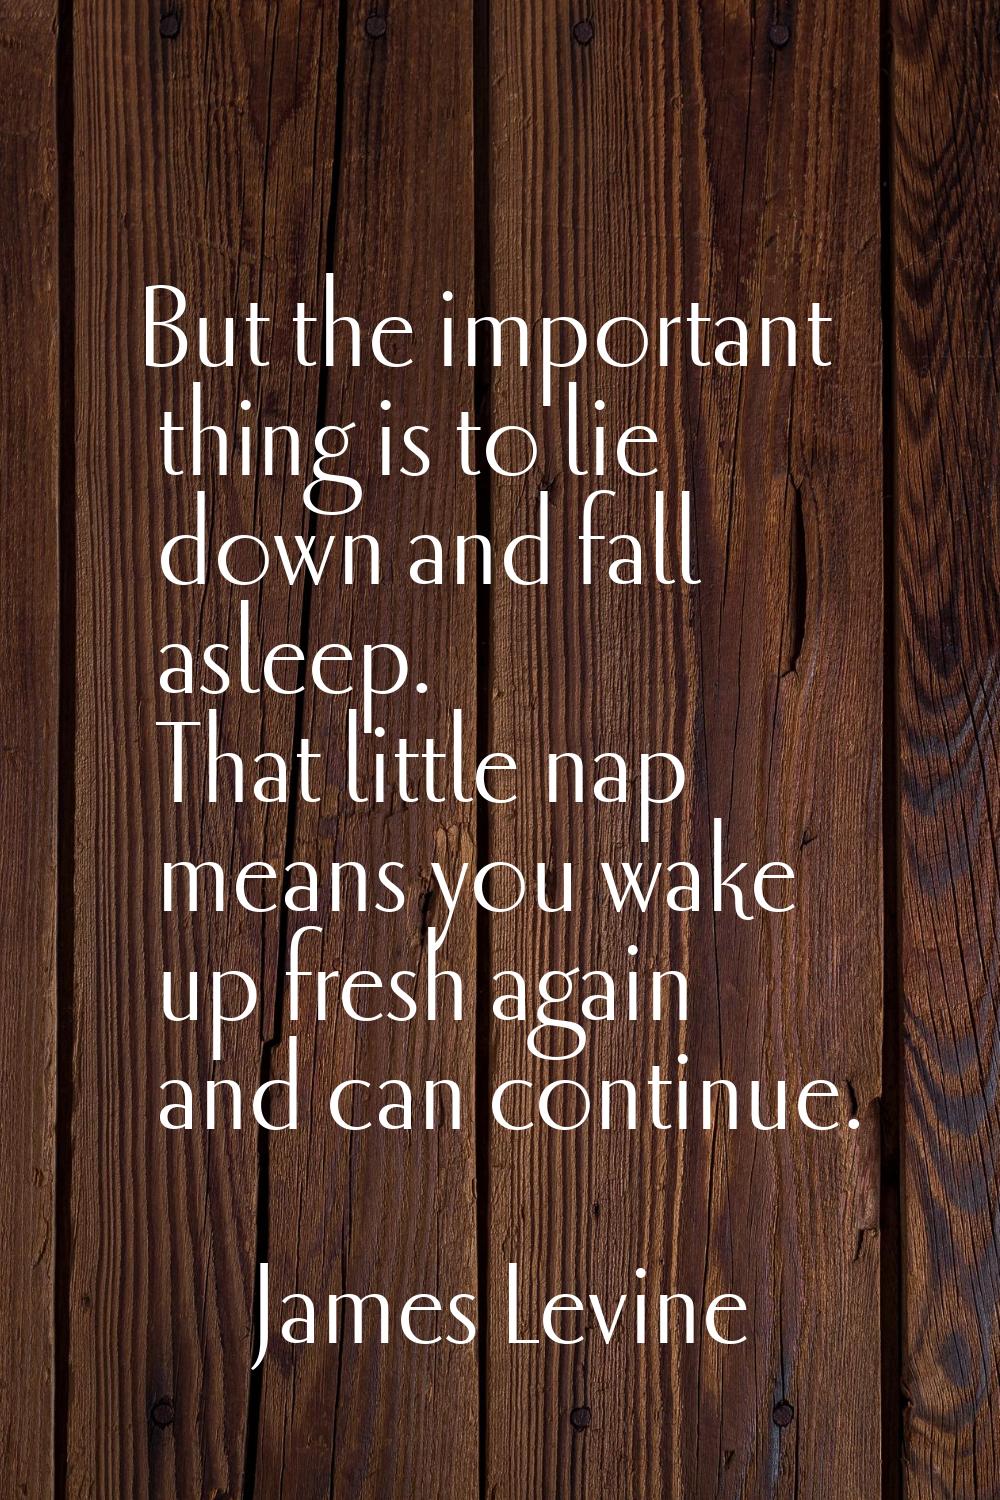 But the important thing is to lie down and fall asleep. That little nap means you wake up fresh aga